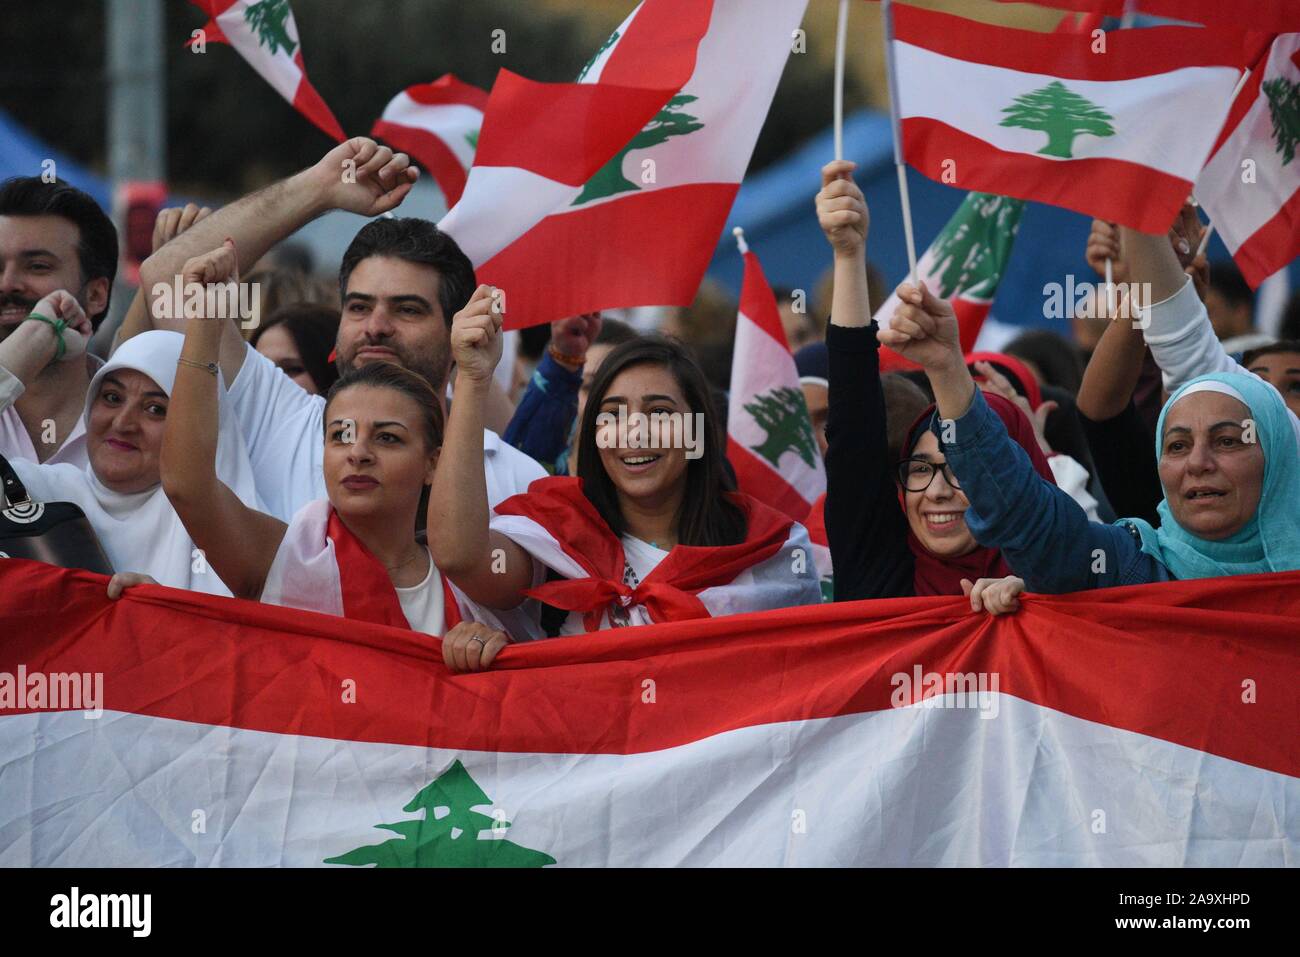 *** STRICTLY NO SALES TO FRENCH MEDIA OR PUBLISHERS *** November 17, 2019 - Beirut, Lebanon: Lebanese women join mass protests on Martyrs' Square to celebrate one month since the beginning of the Lebanese revolution. Des Libanaises participent aux manifestations pres de la Place des Martyrs pour feter un mois de soulevement populaire. Stock Photo